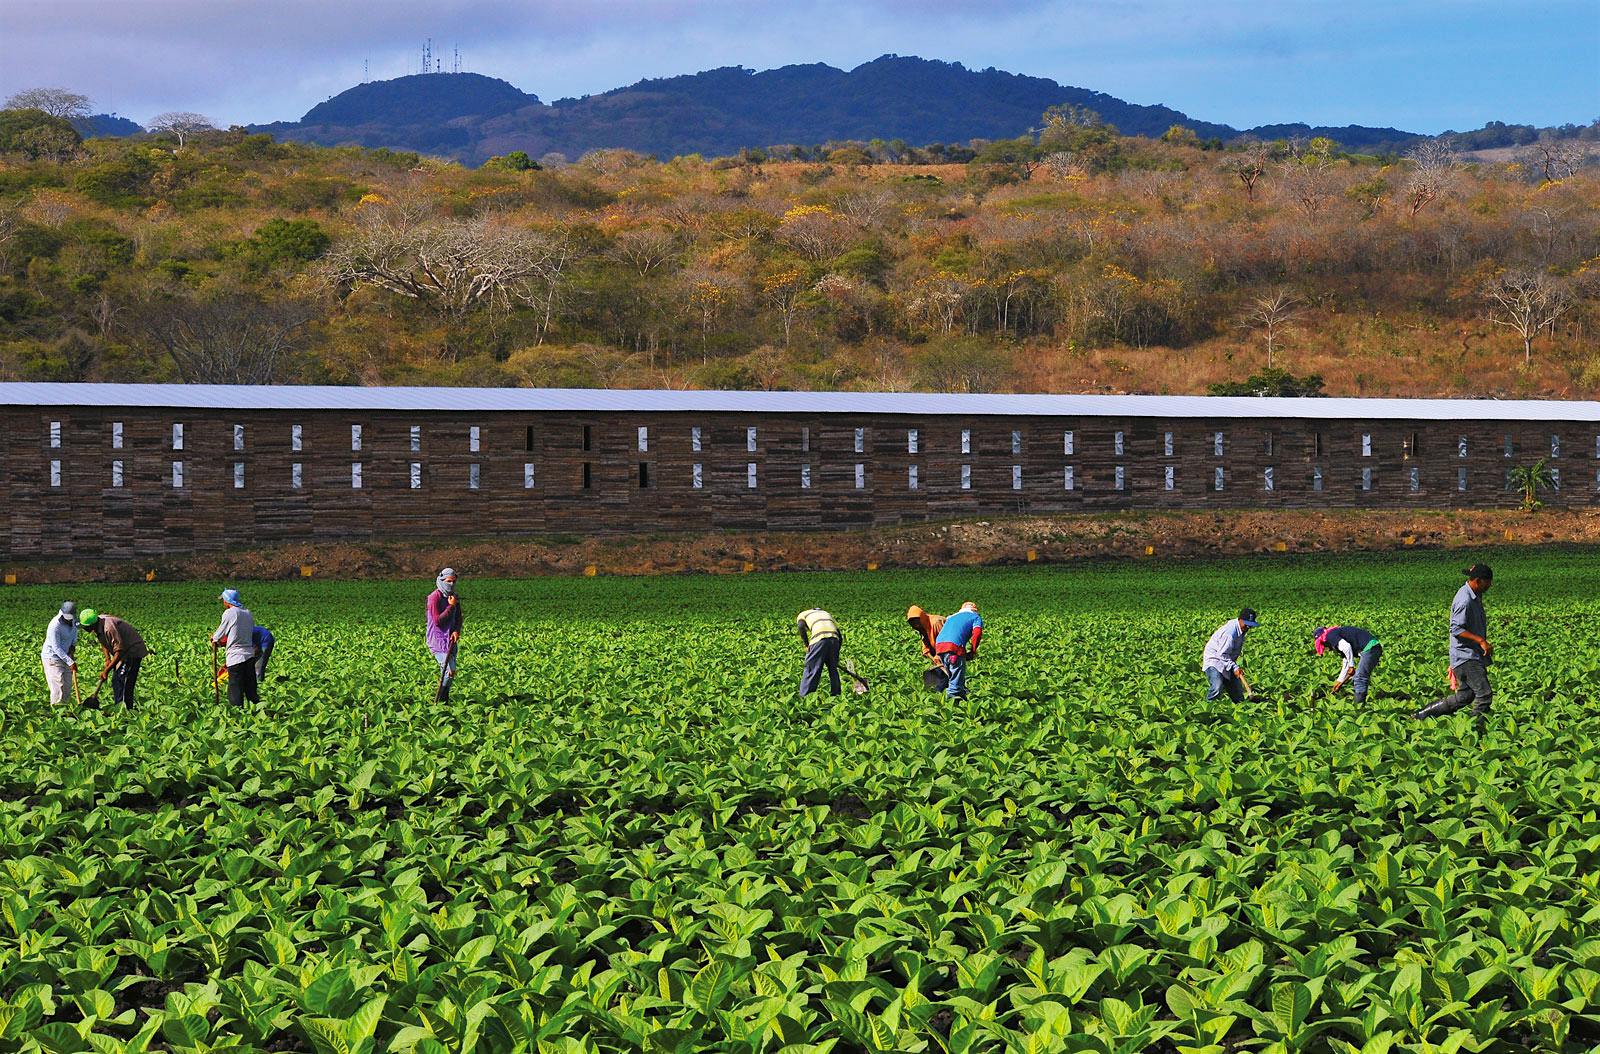 Workers tend the fields of a Fernandez farm in Estelí, Nicaragua. The Criollo ’98 tobacco in the ground is still young, but quickly grows to full maturity.